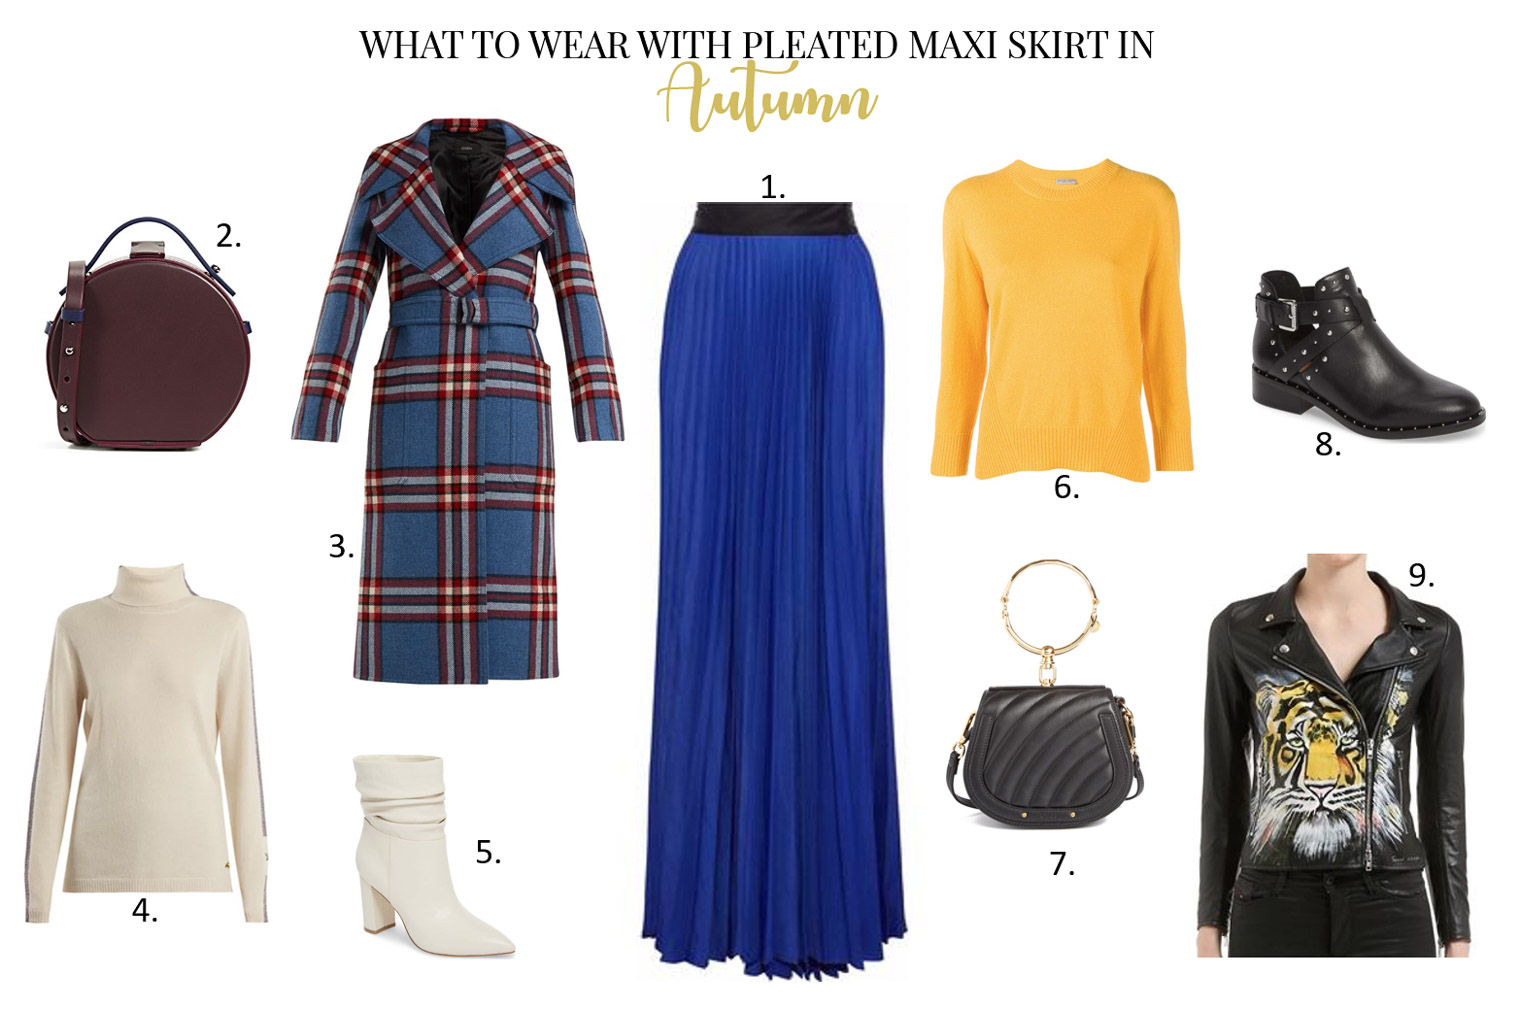 What to wear with pleated maxi skirt in the fall